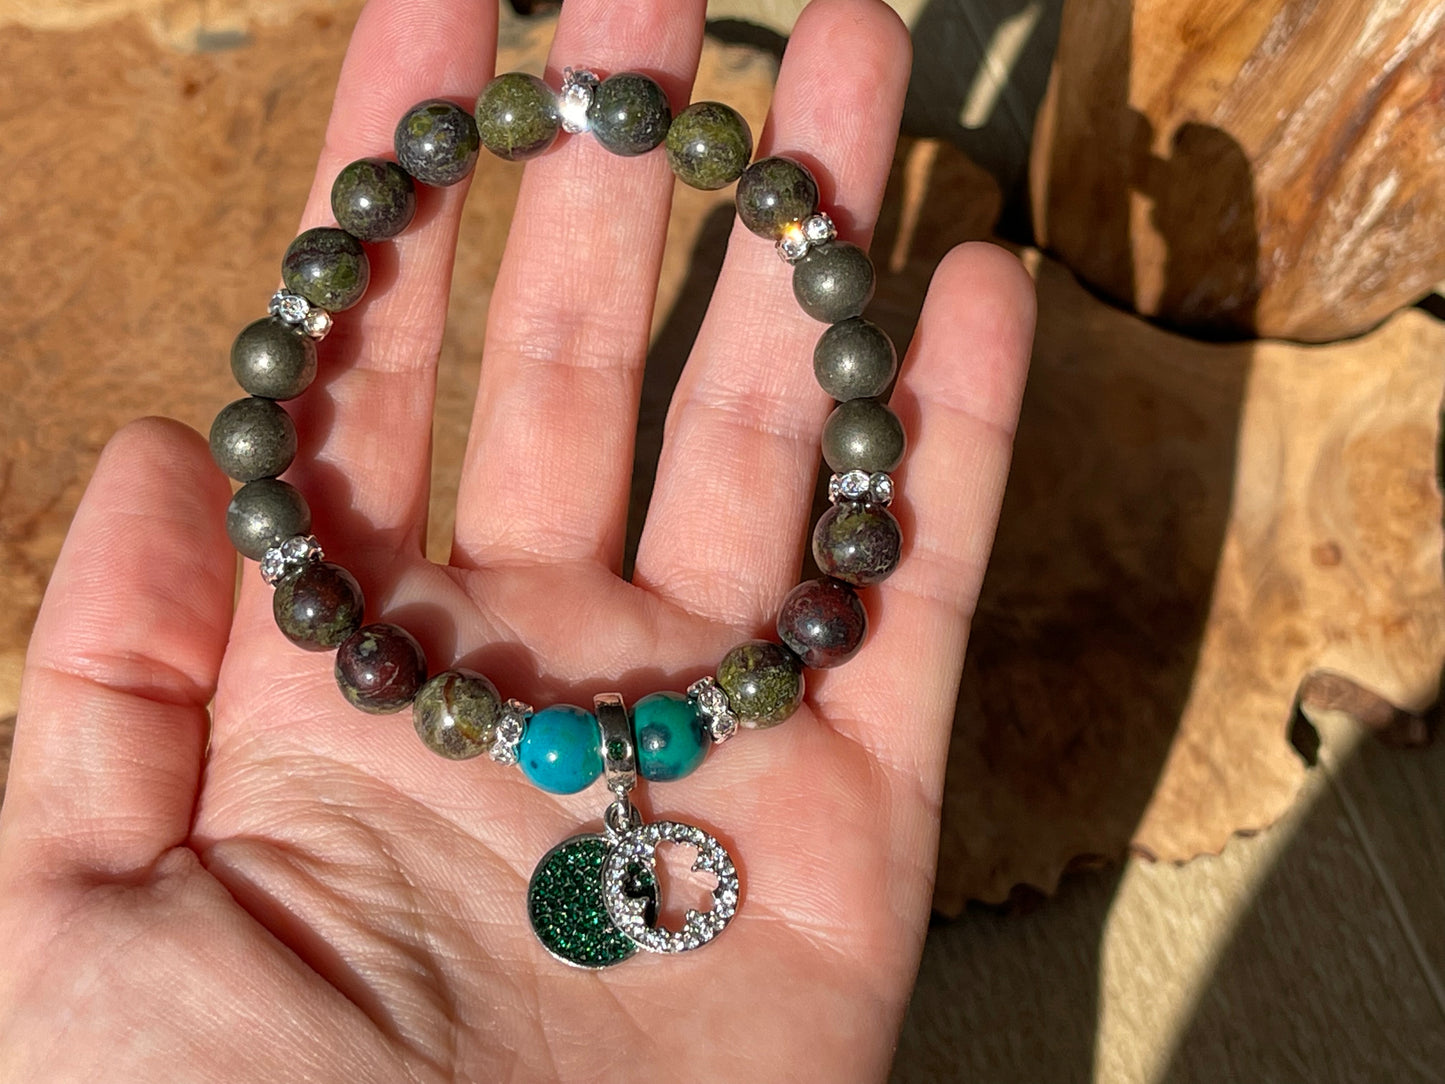 Dragon's blood, pyrite and chrysocolla lucky clover bracelet